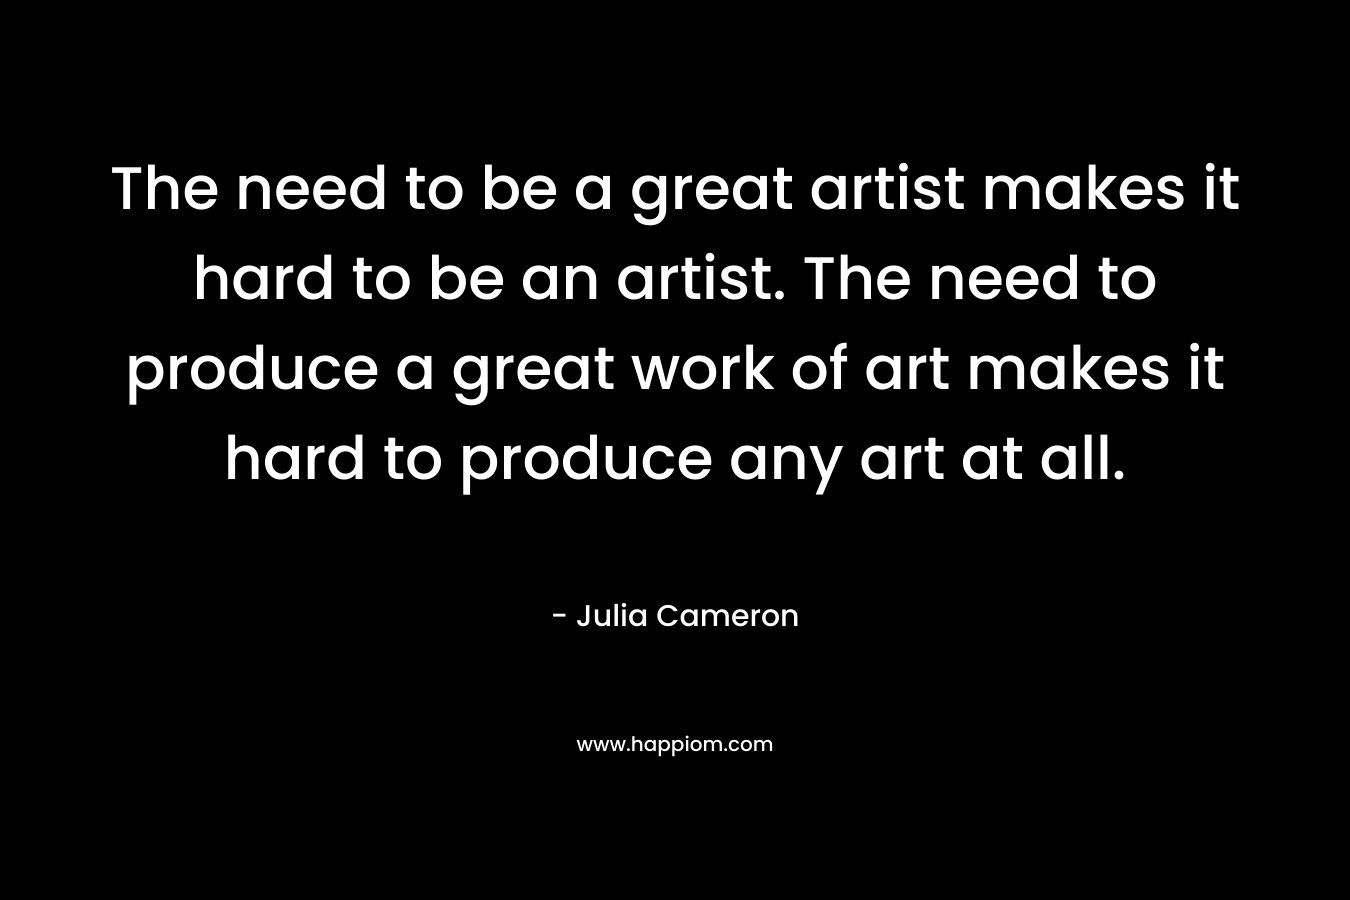 The need to be a great artist makes it hard to be an artist. The need to produce a great work of art makes it hard to produce any art at all.